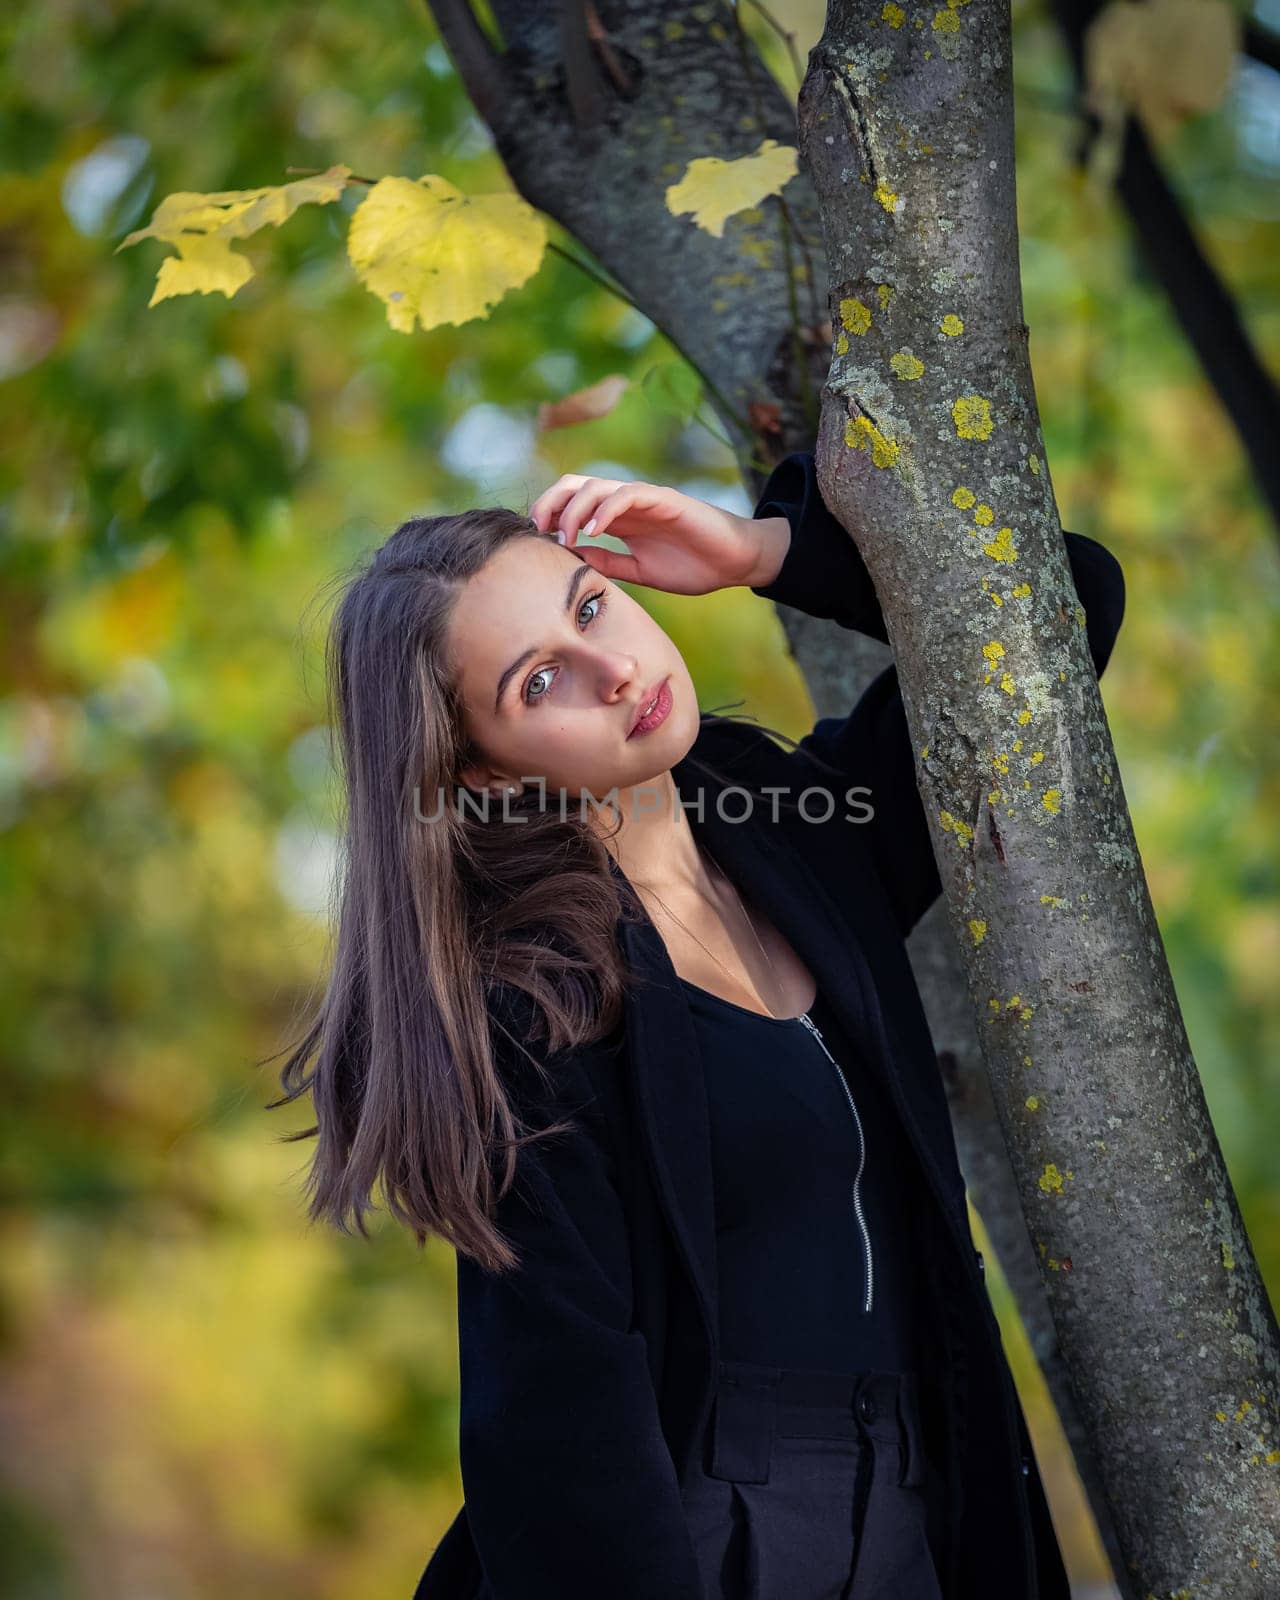 A beautiful girl stands by a tree in an autumn park